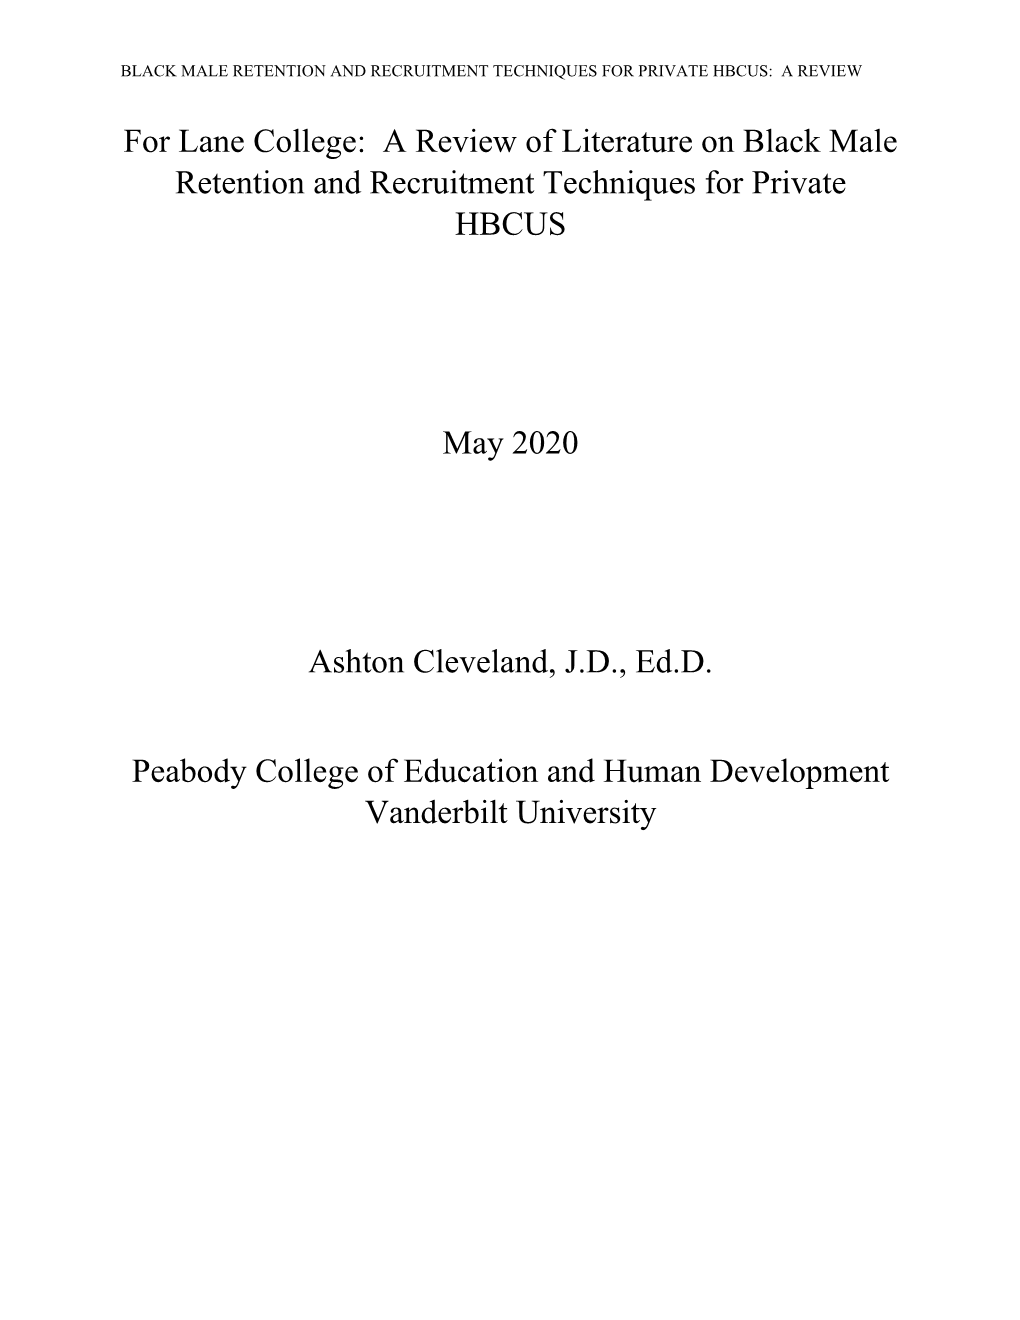 For Lane College: a Review of Literature on Black Male Retention and Recruitment Techniques for Private HBCUS